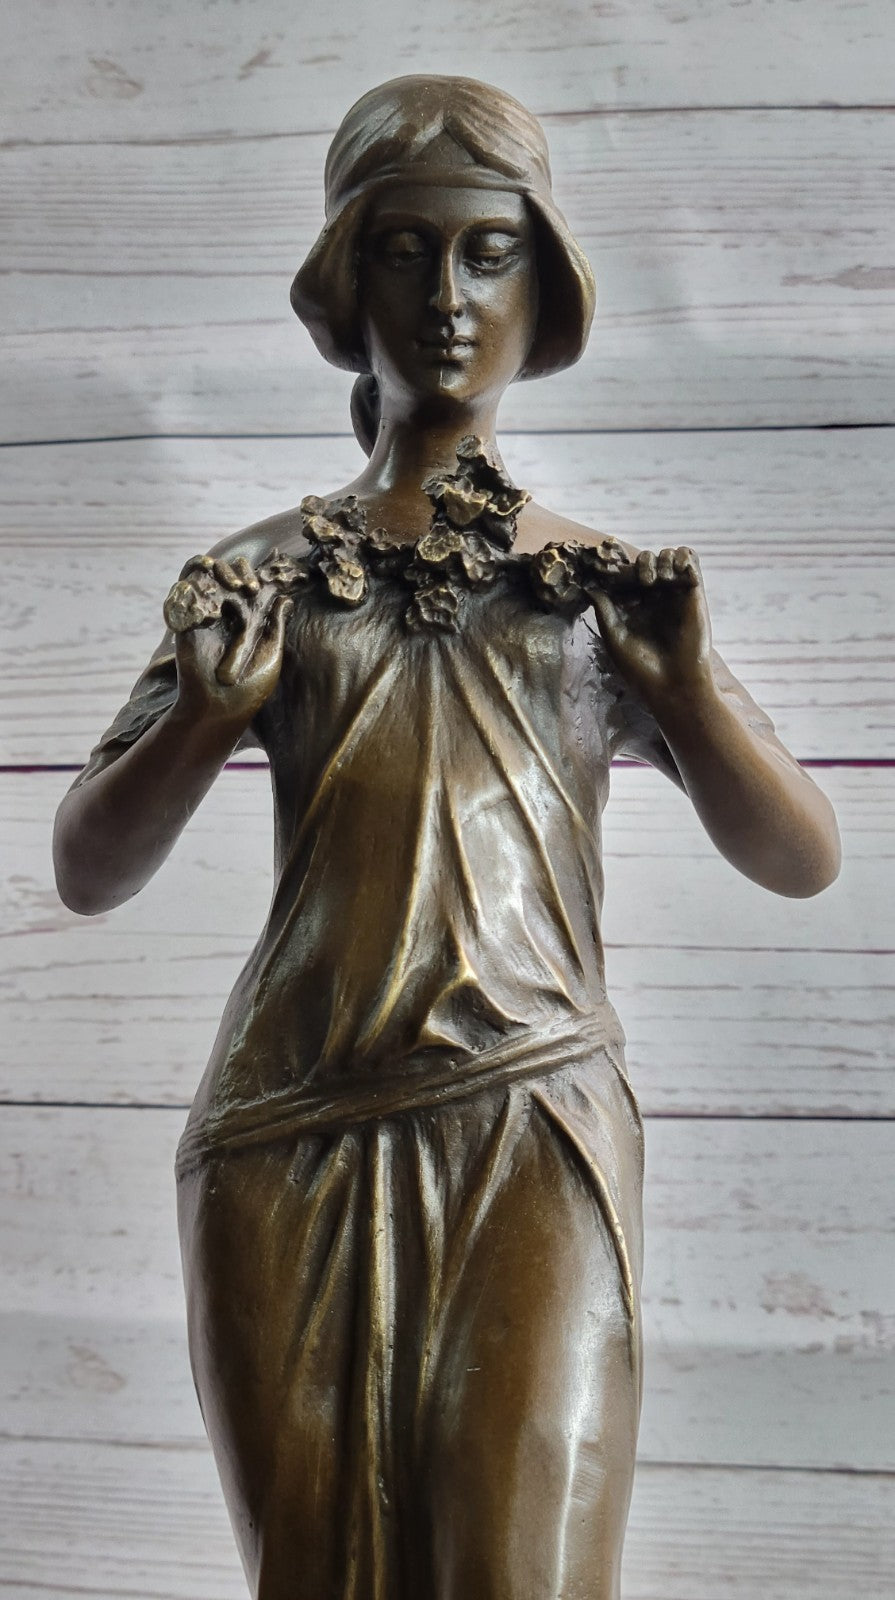 Collectible Art Deco Bronze Figurine of a Woman, Representing the Essence of Spring Sculpture